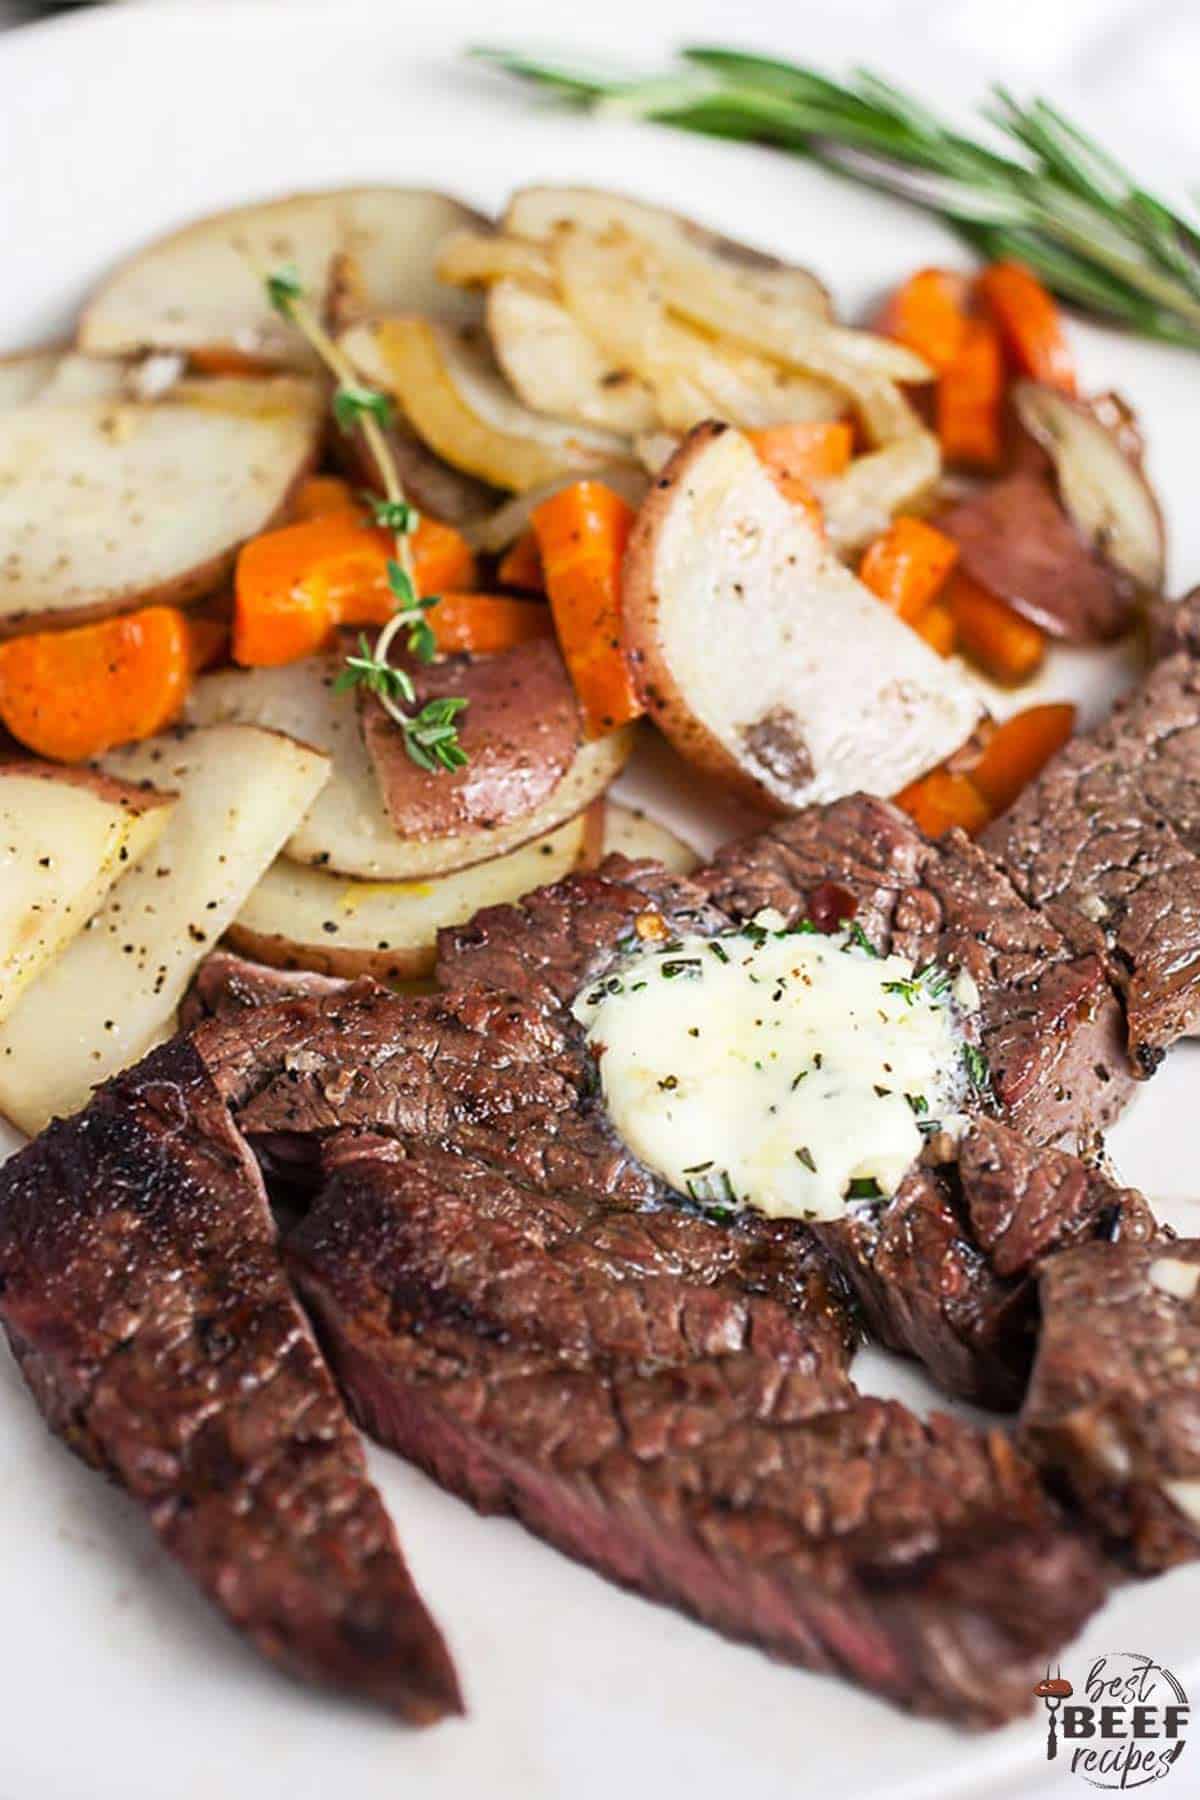 Grilled chuck steak on a white plate with potatoes